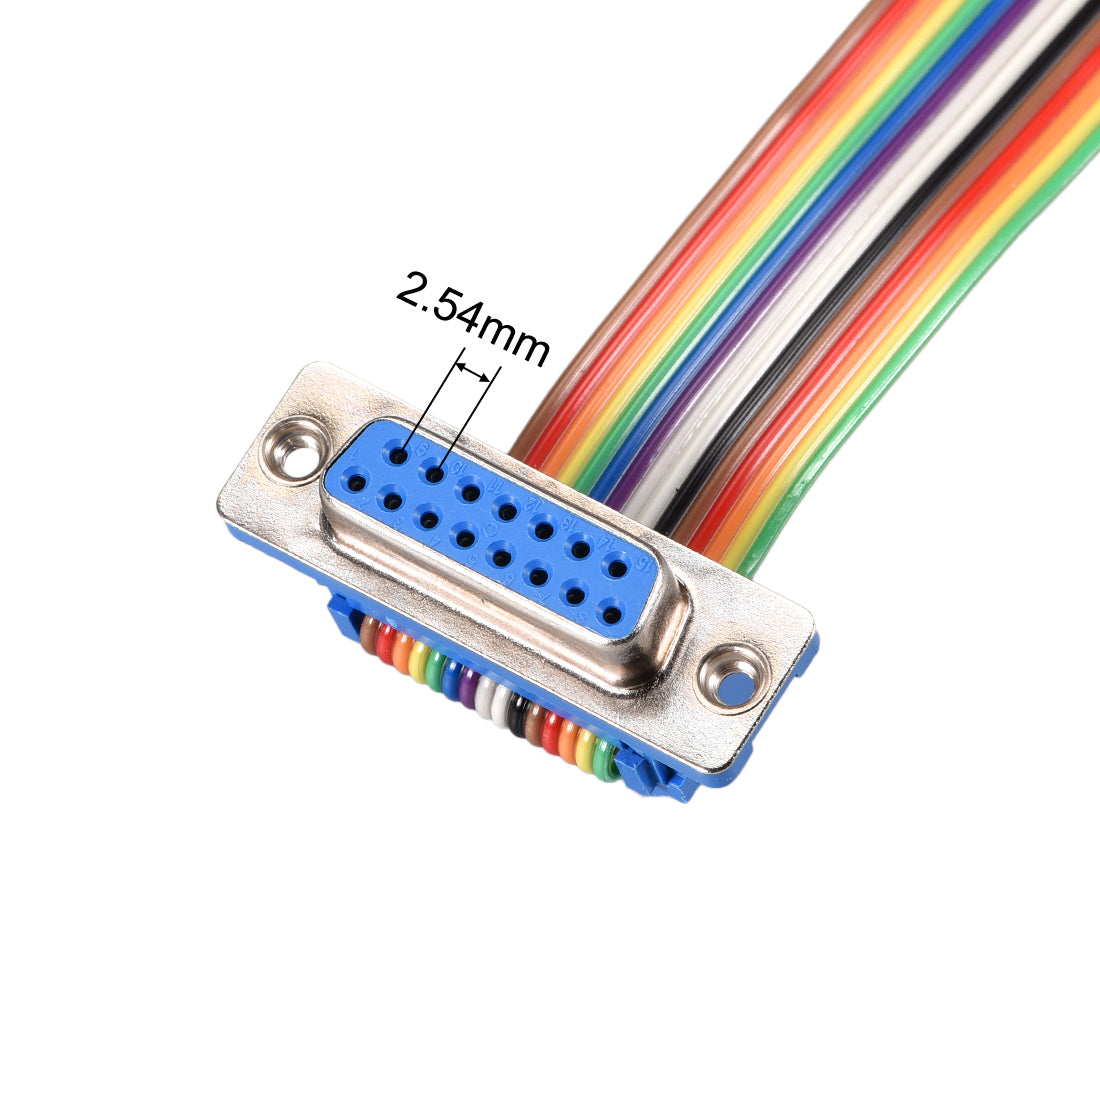 uxcell Uxcell IDC Rainbow Wire Flat Ribbon Cable DB15 F/F Connector 2.54mm Pitch 11.8inch Long